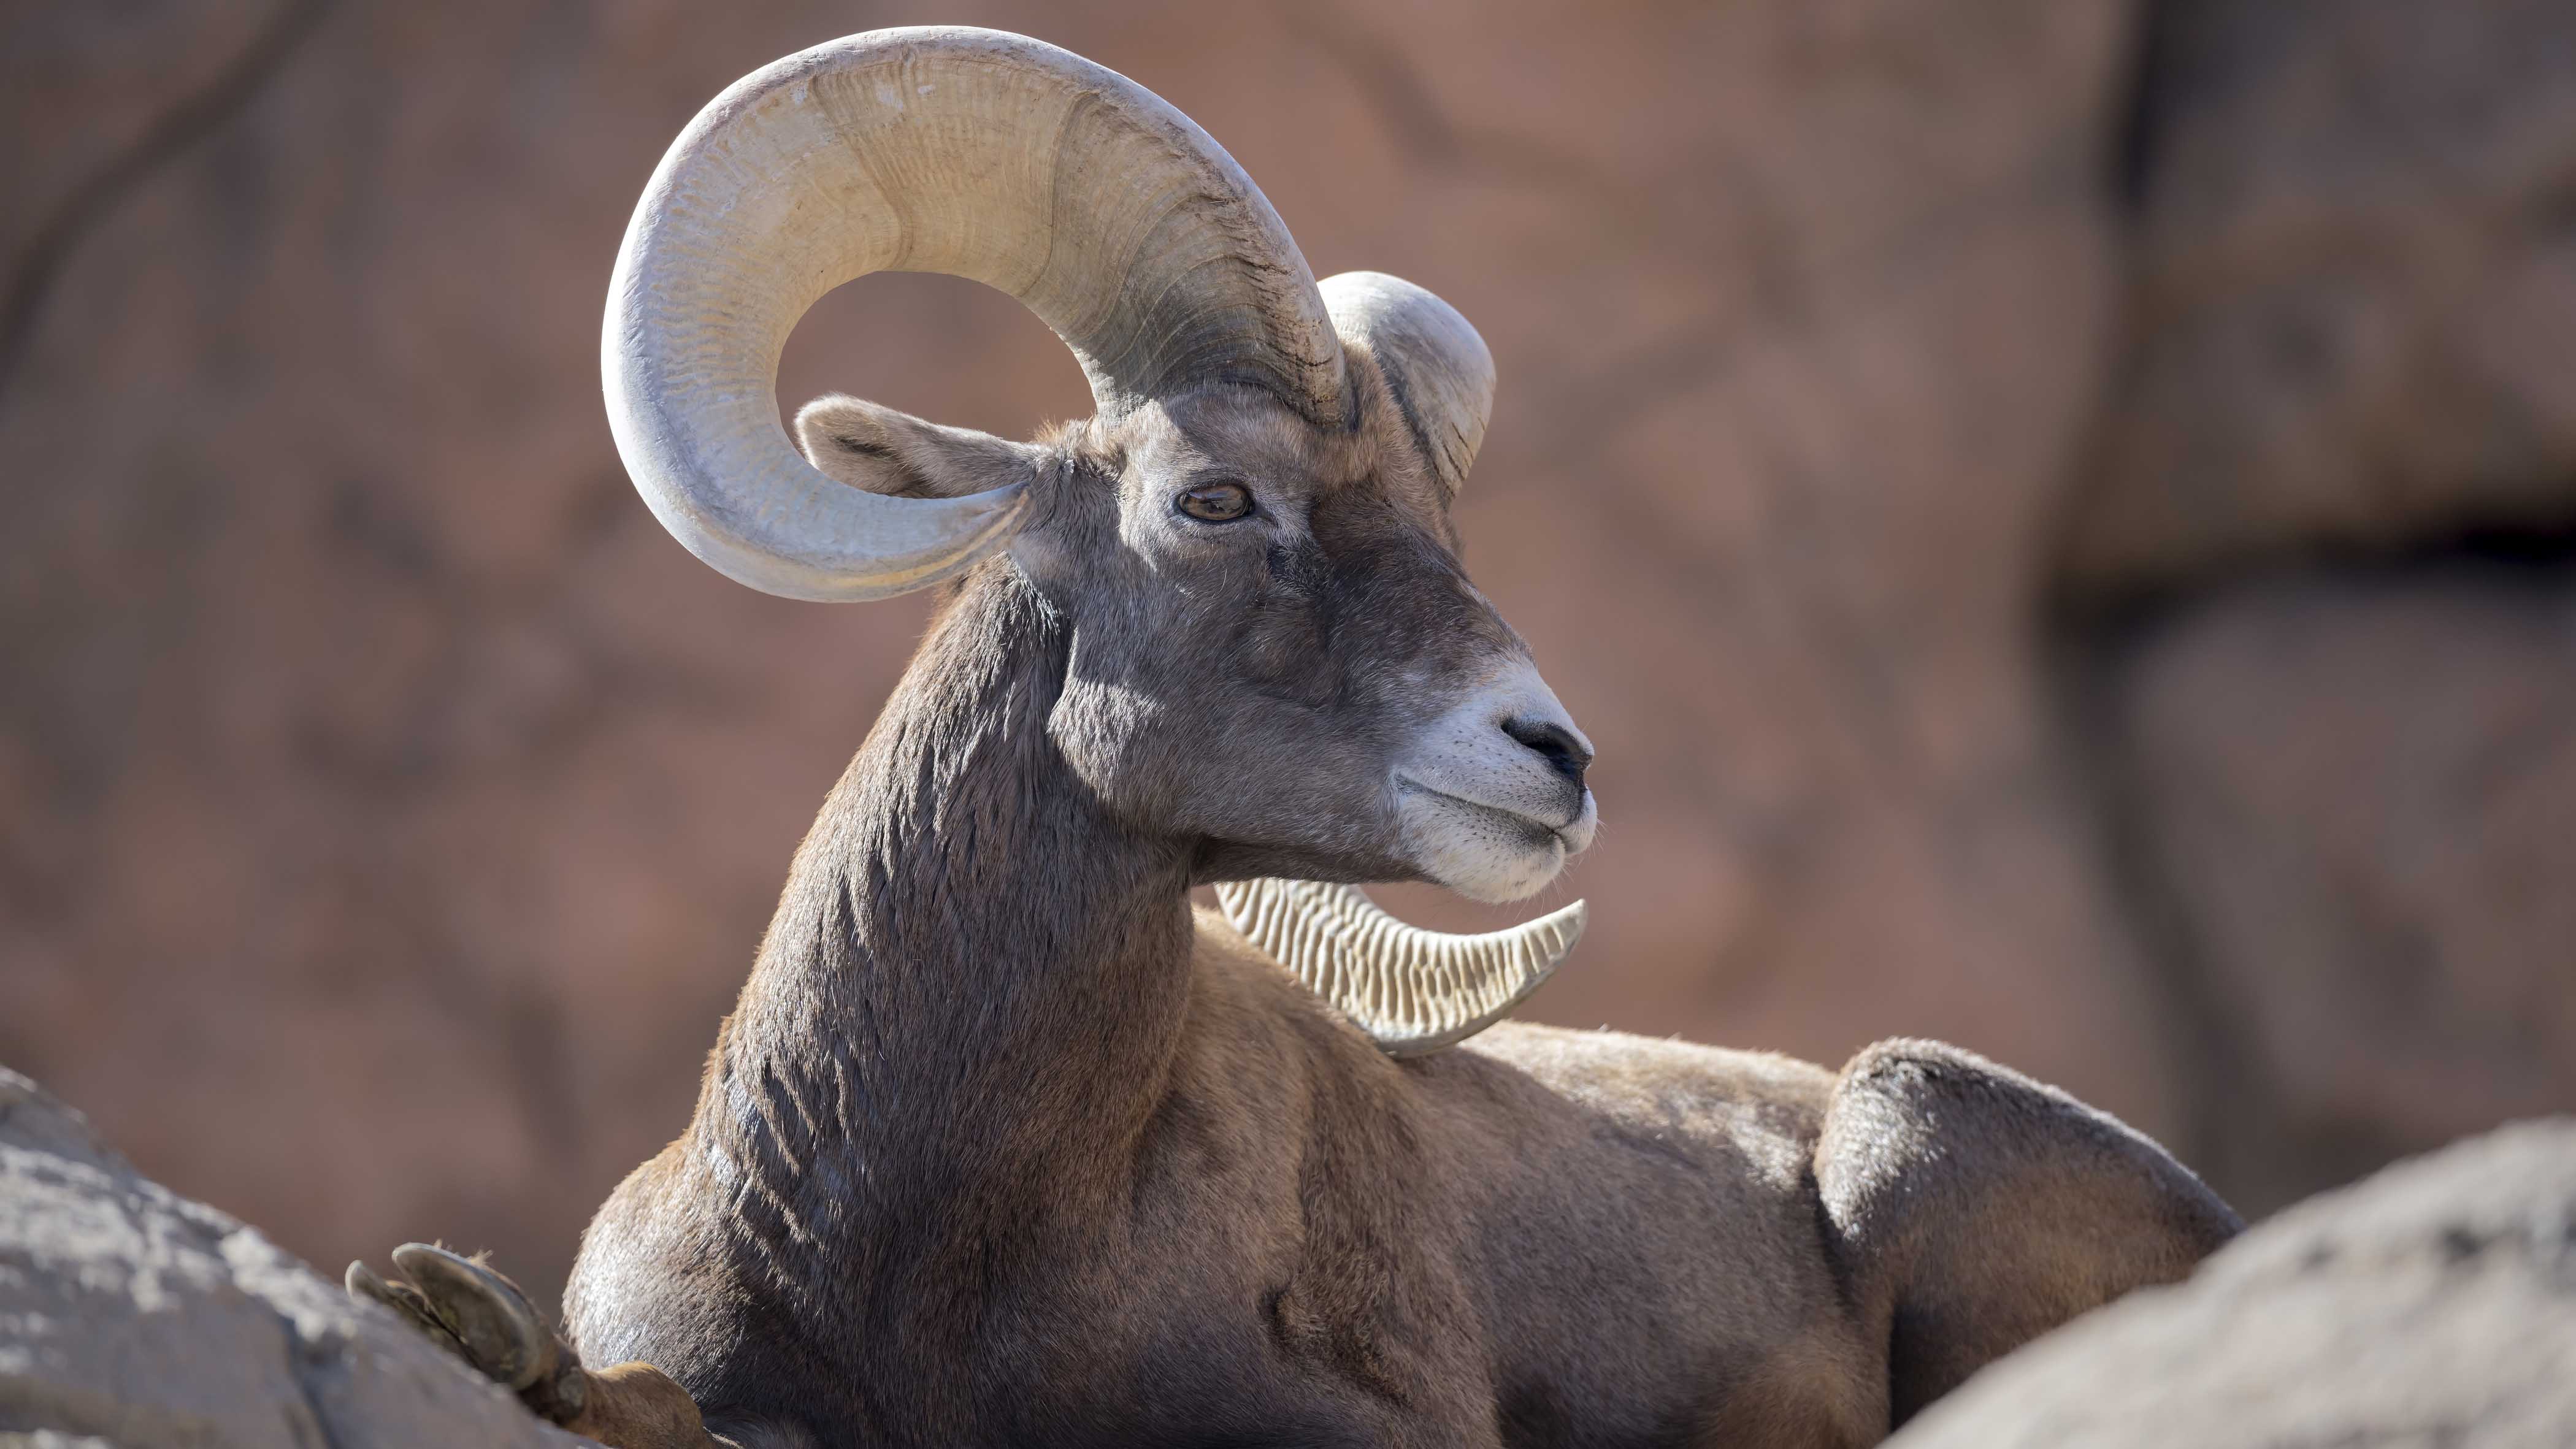 The population of bighorn sheep in the American West once number in the millions. It is now in the tens of thousands. A bacterial has played an outsized role.